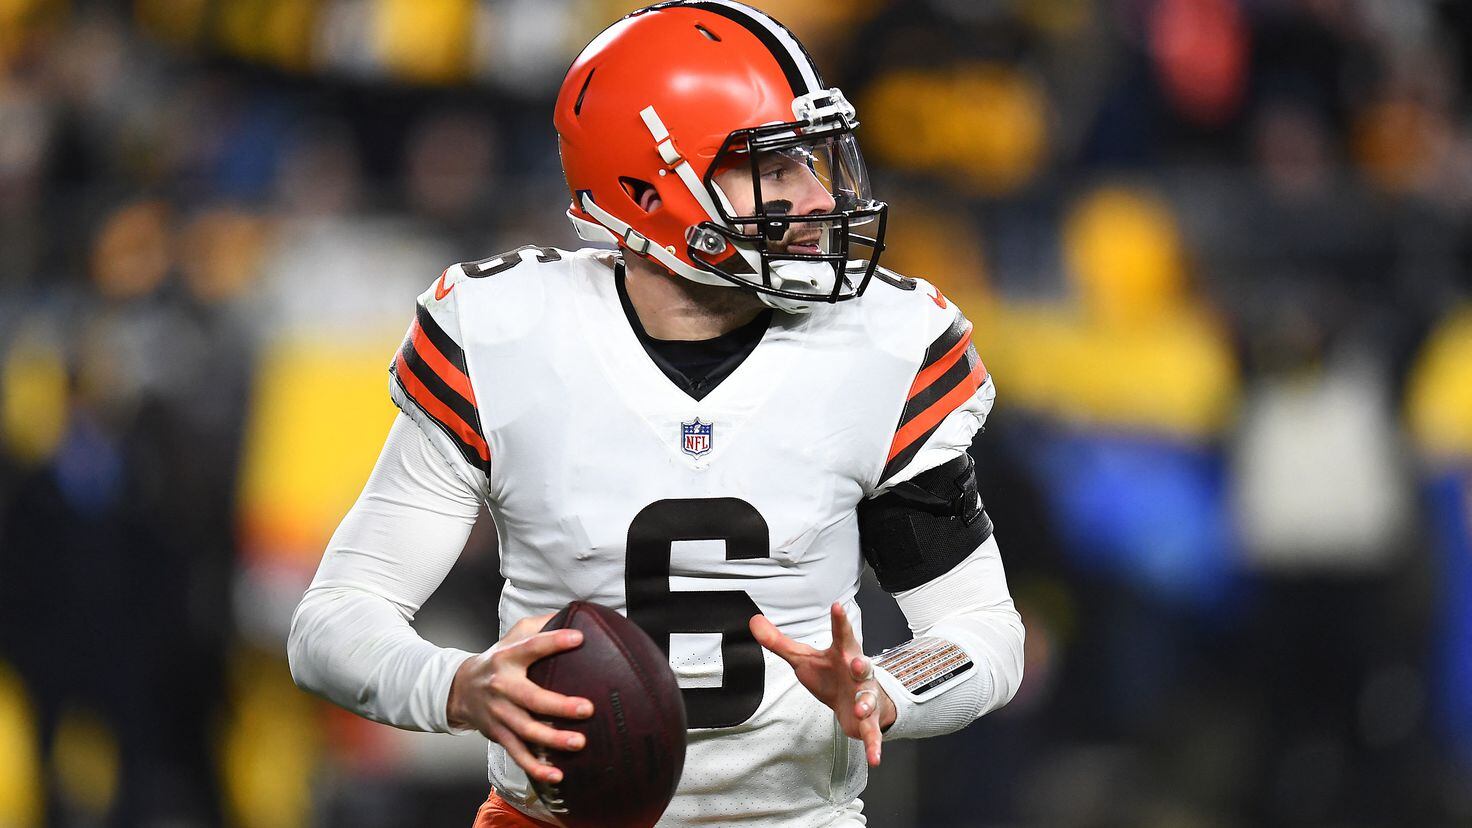 Baker Mayfield paid his Panthers teammate to use the No. 6 jersey